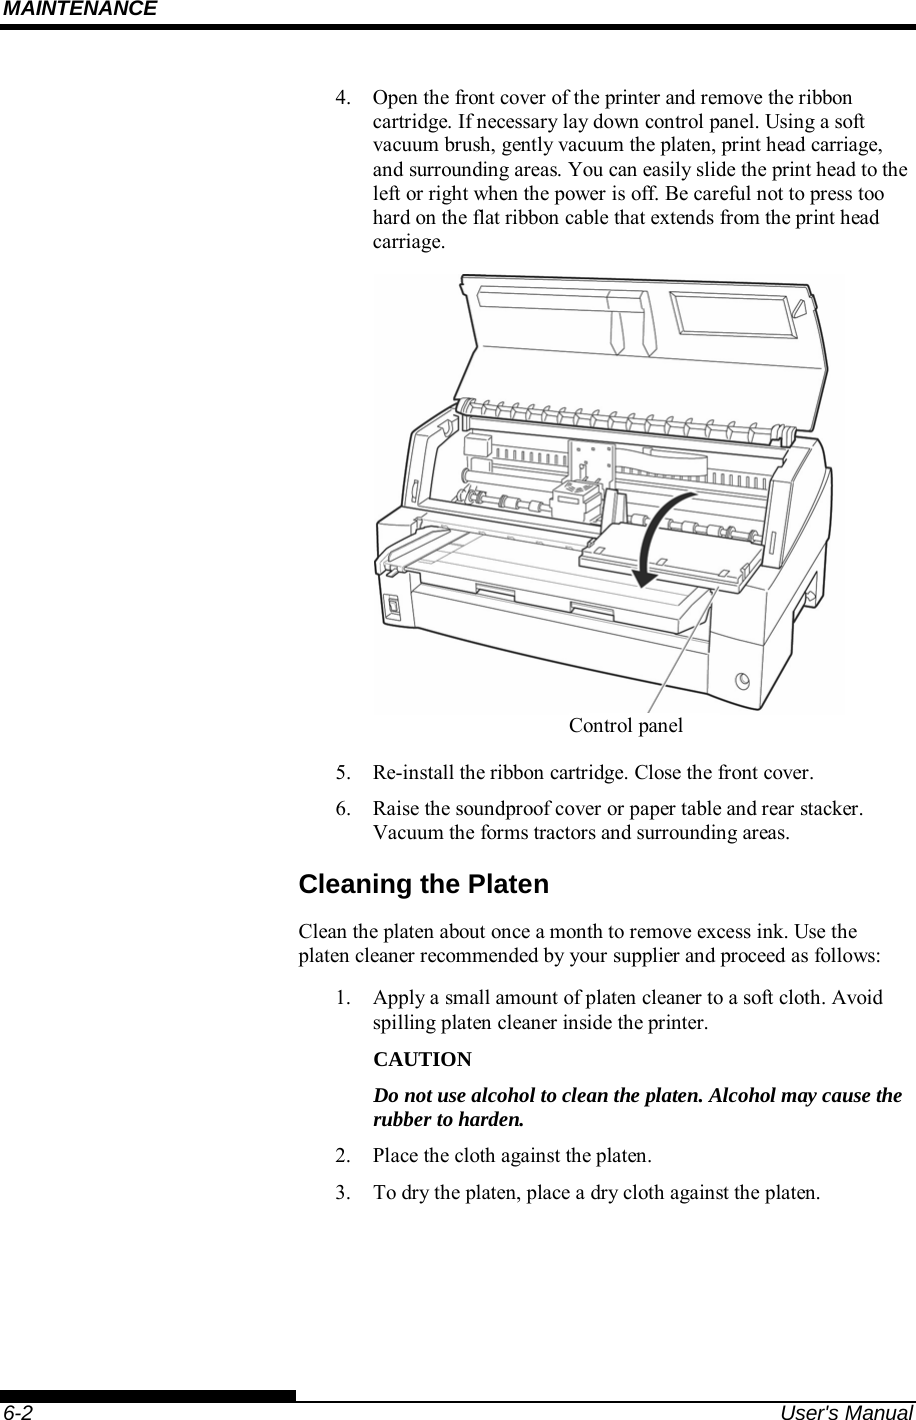 MAINTENANCE    6-2  User&apos;s Manual 4.  Open the front cover of the printer and remove the ribbon cartridge. If necessary lay down control panel. Using a soft vacuum brush, gently vacuum the platen, print head carriage, and surrounding areas. You can easily slide the print head to the left or right when the power is off. Be careful not to press too hard on the flat ribbon cable that extends from the print head carriage.         Printer interior   5.  Re-install the ribbon cartridge. Close the front cover. 6.  Raise the soundproof cover or paper table and rear stacker. Vacuum the forms tractors and surrounding areas. Cleaning the Platen Clean the platen about once a month to remove excess ink. Use the platen cleaner recommended by your supplier and proceed as follows: 1.  Apply a small amount of platen cleaner to a soft cloth. Avoid spilling platen cleaner inside the printer. CAUTION Do not use alcohol to clean the platen. Alcohol may cause the rubber to harden. 2.  Place the cloth against the platen. 3.  To dry the platen, place a dry cloth against the platen.  Control panel 